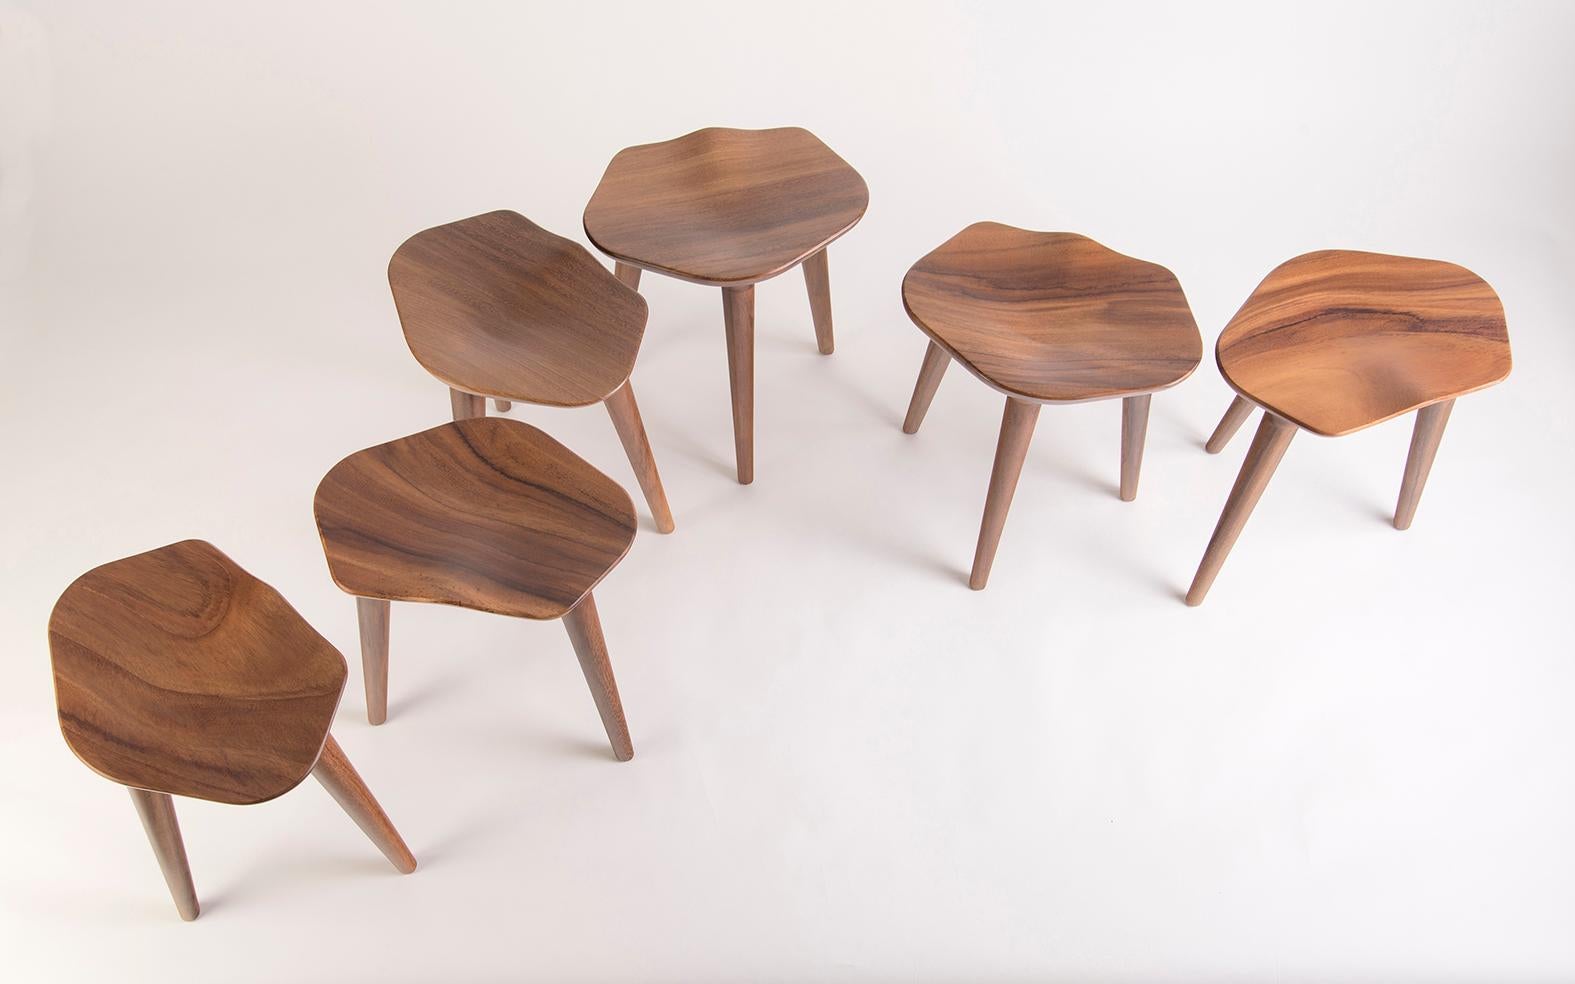 A sculptural clover or three stools tam is both of those things. Like leaves that blow in the wind, the individual stools can land dispersed throughout the house, or they can stay together as a clover, for good luck. As light shines on the tam